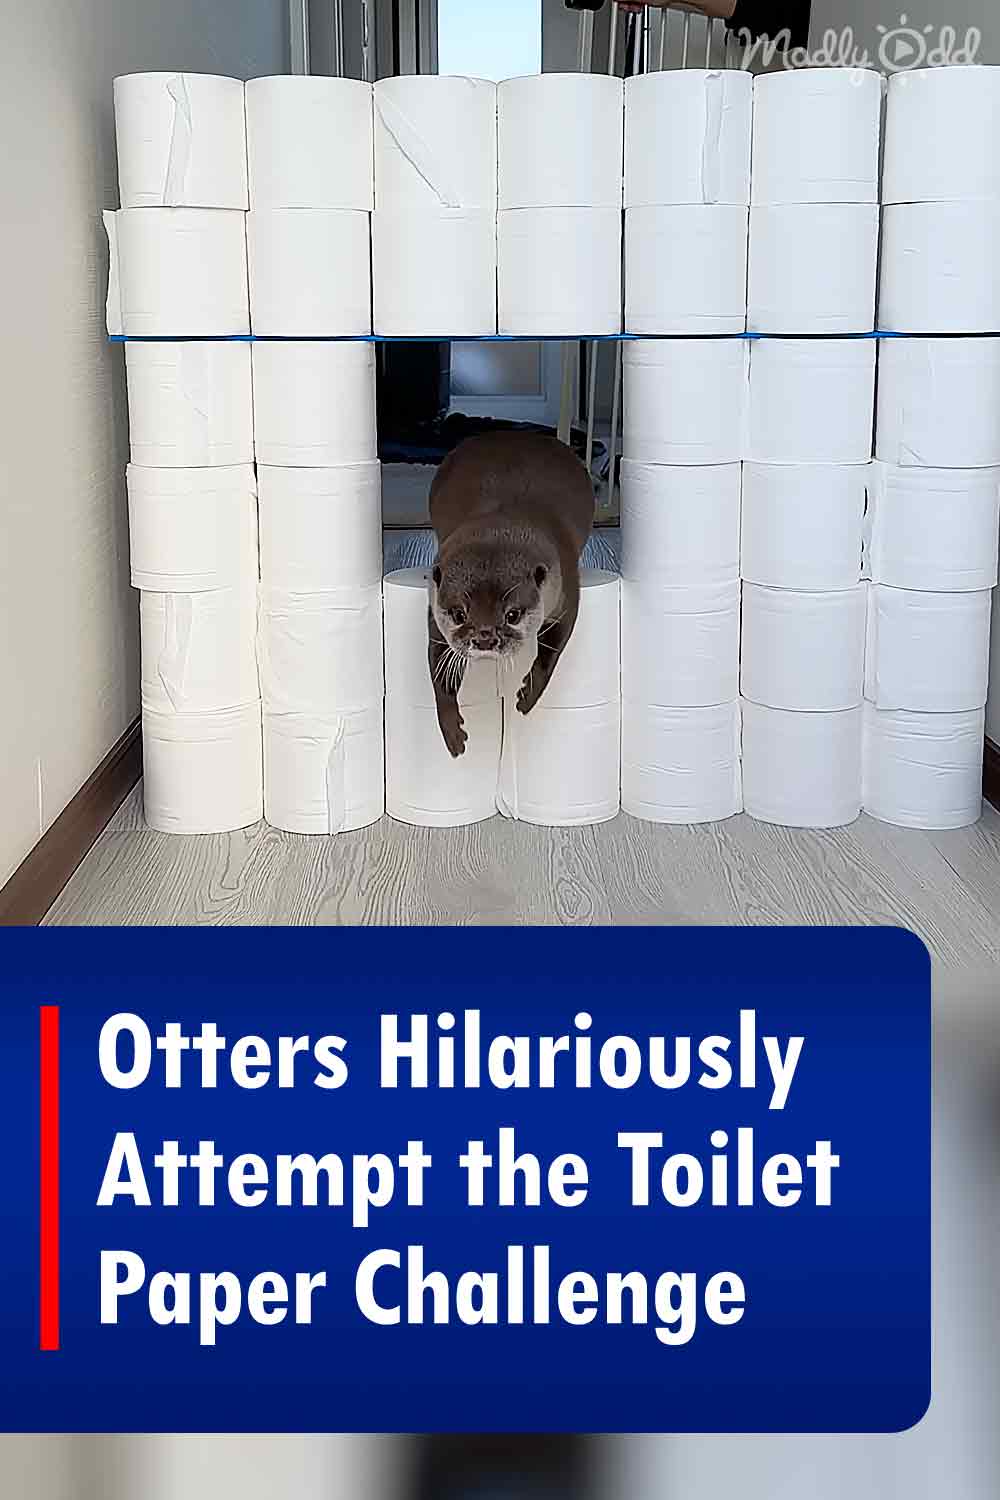 Otters Hilariously Attempt the Toilet Paper Challenge